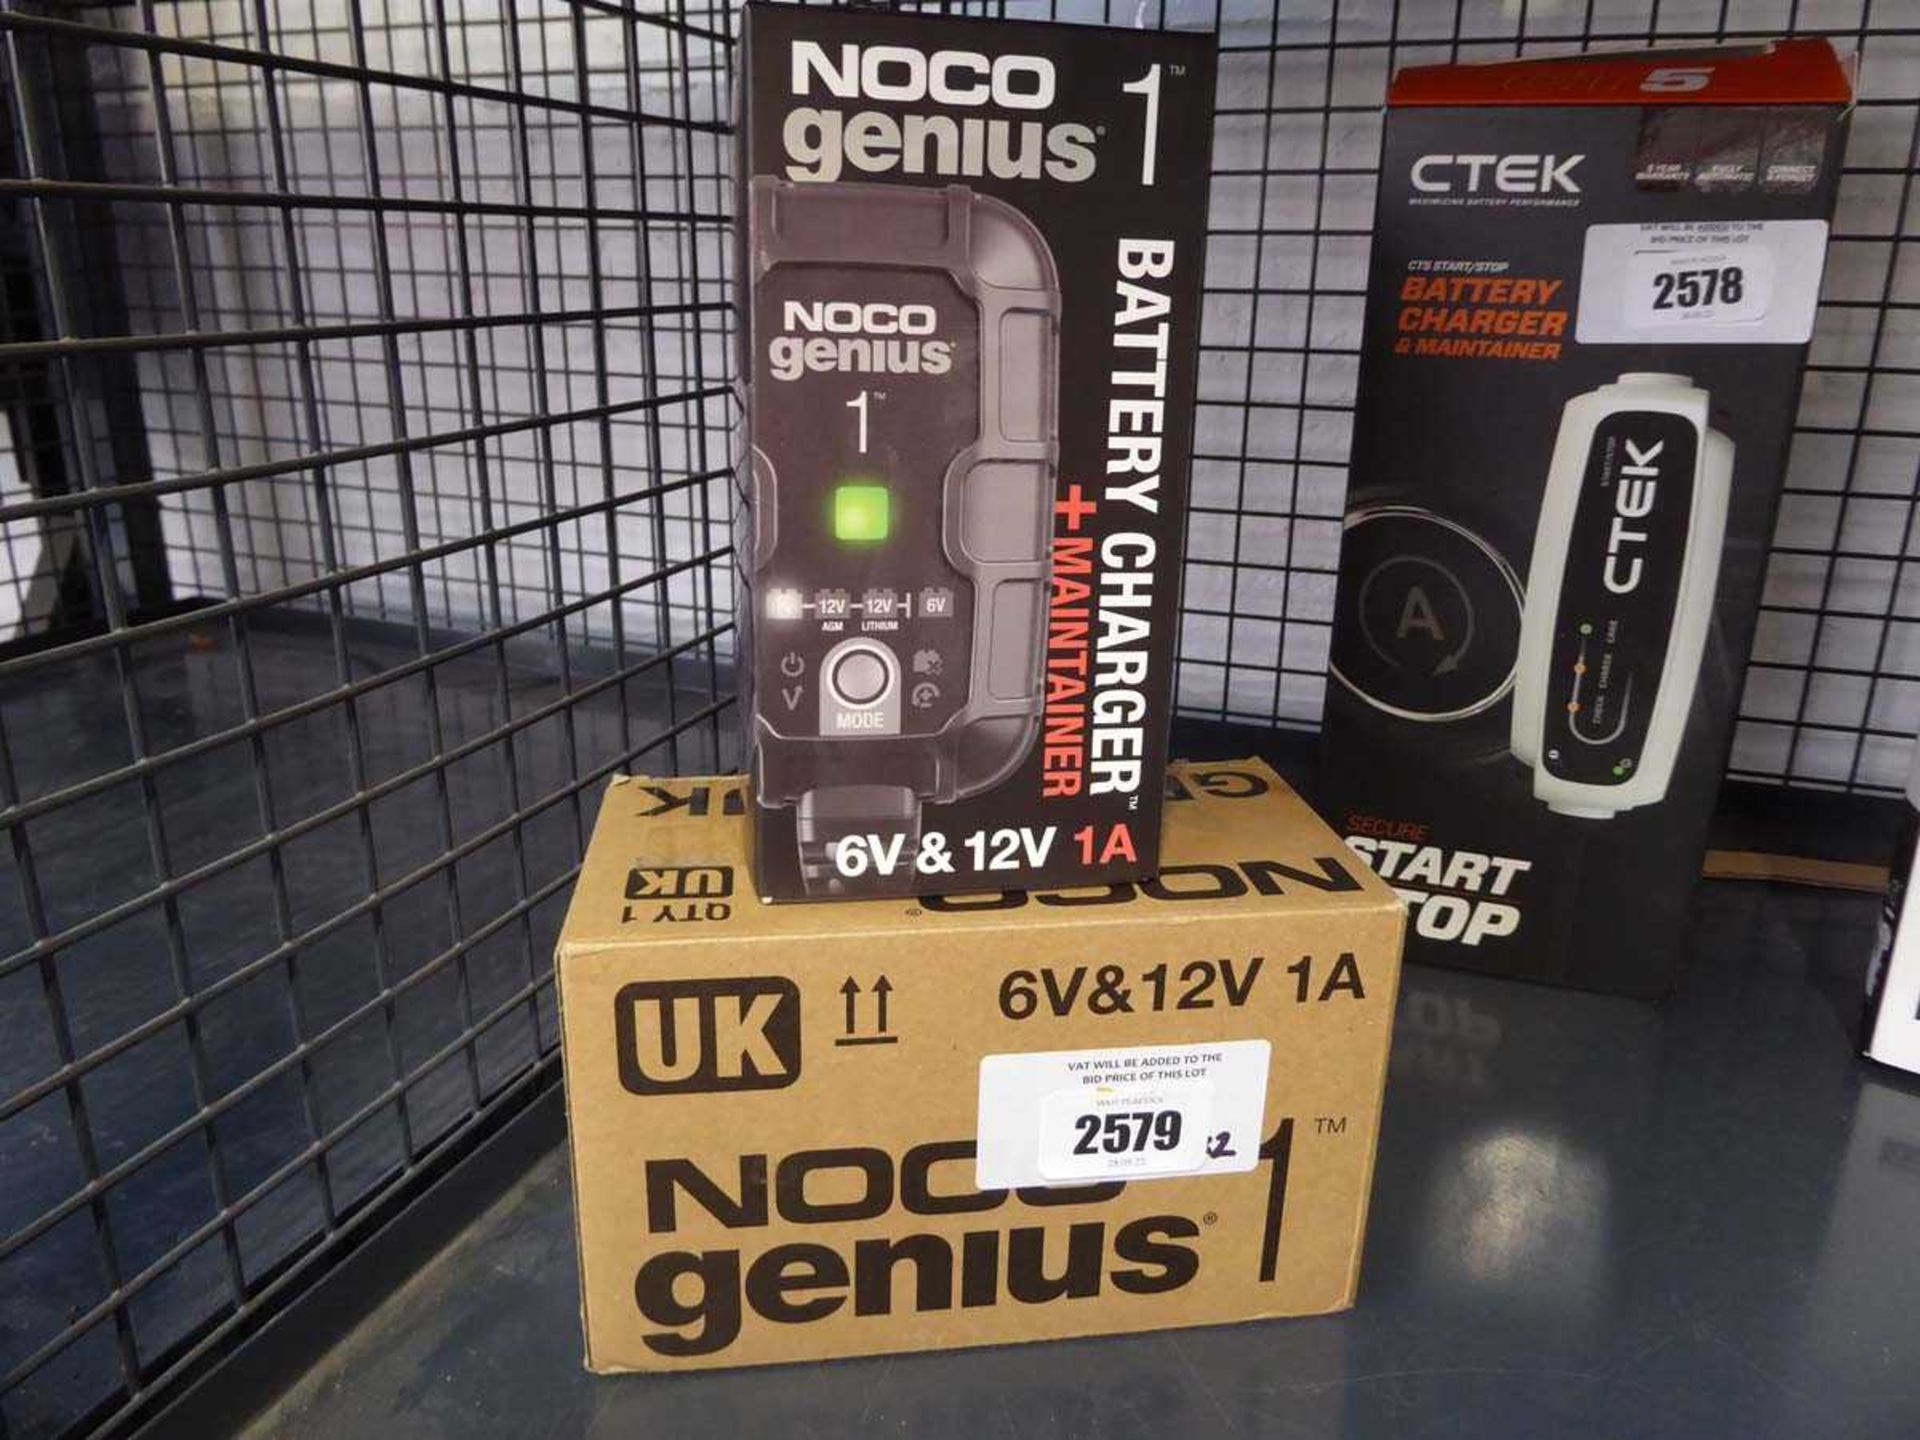 +VAT 2 boxed NOCO Genius 1 6V and 12V battery charger and maintainers